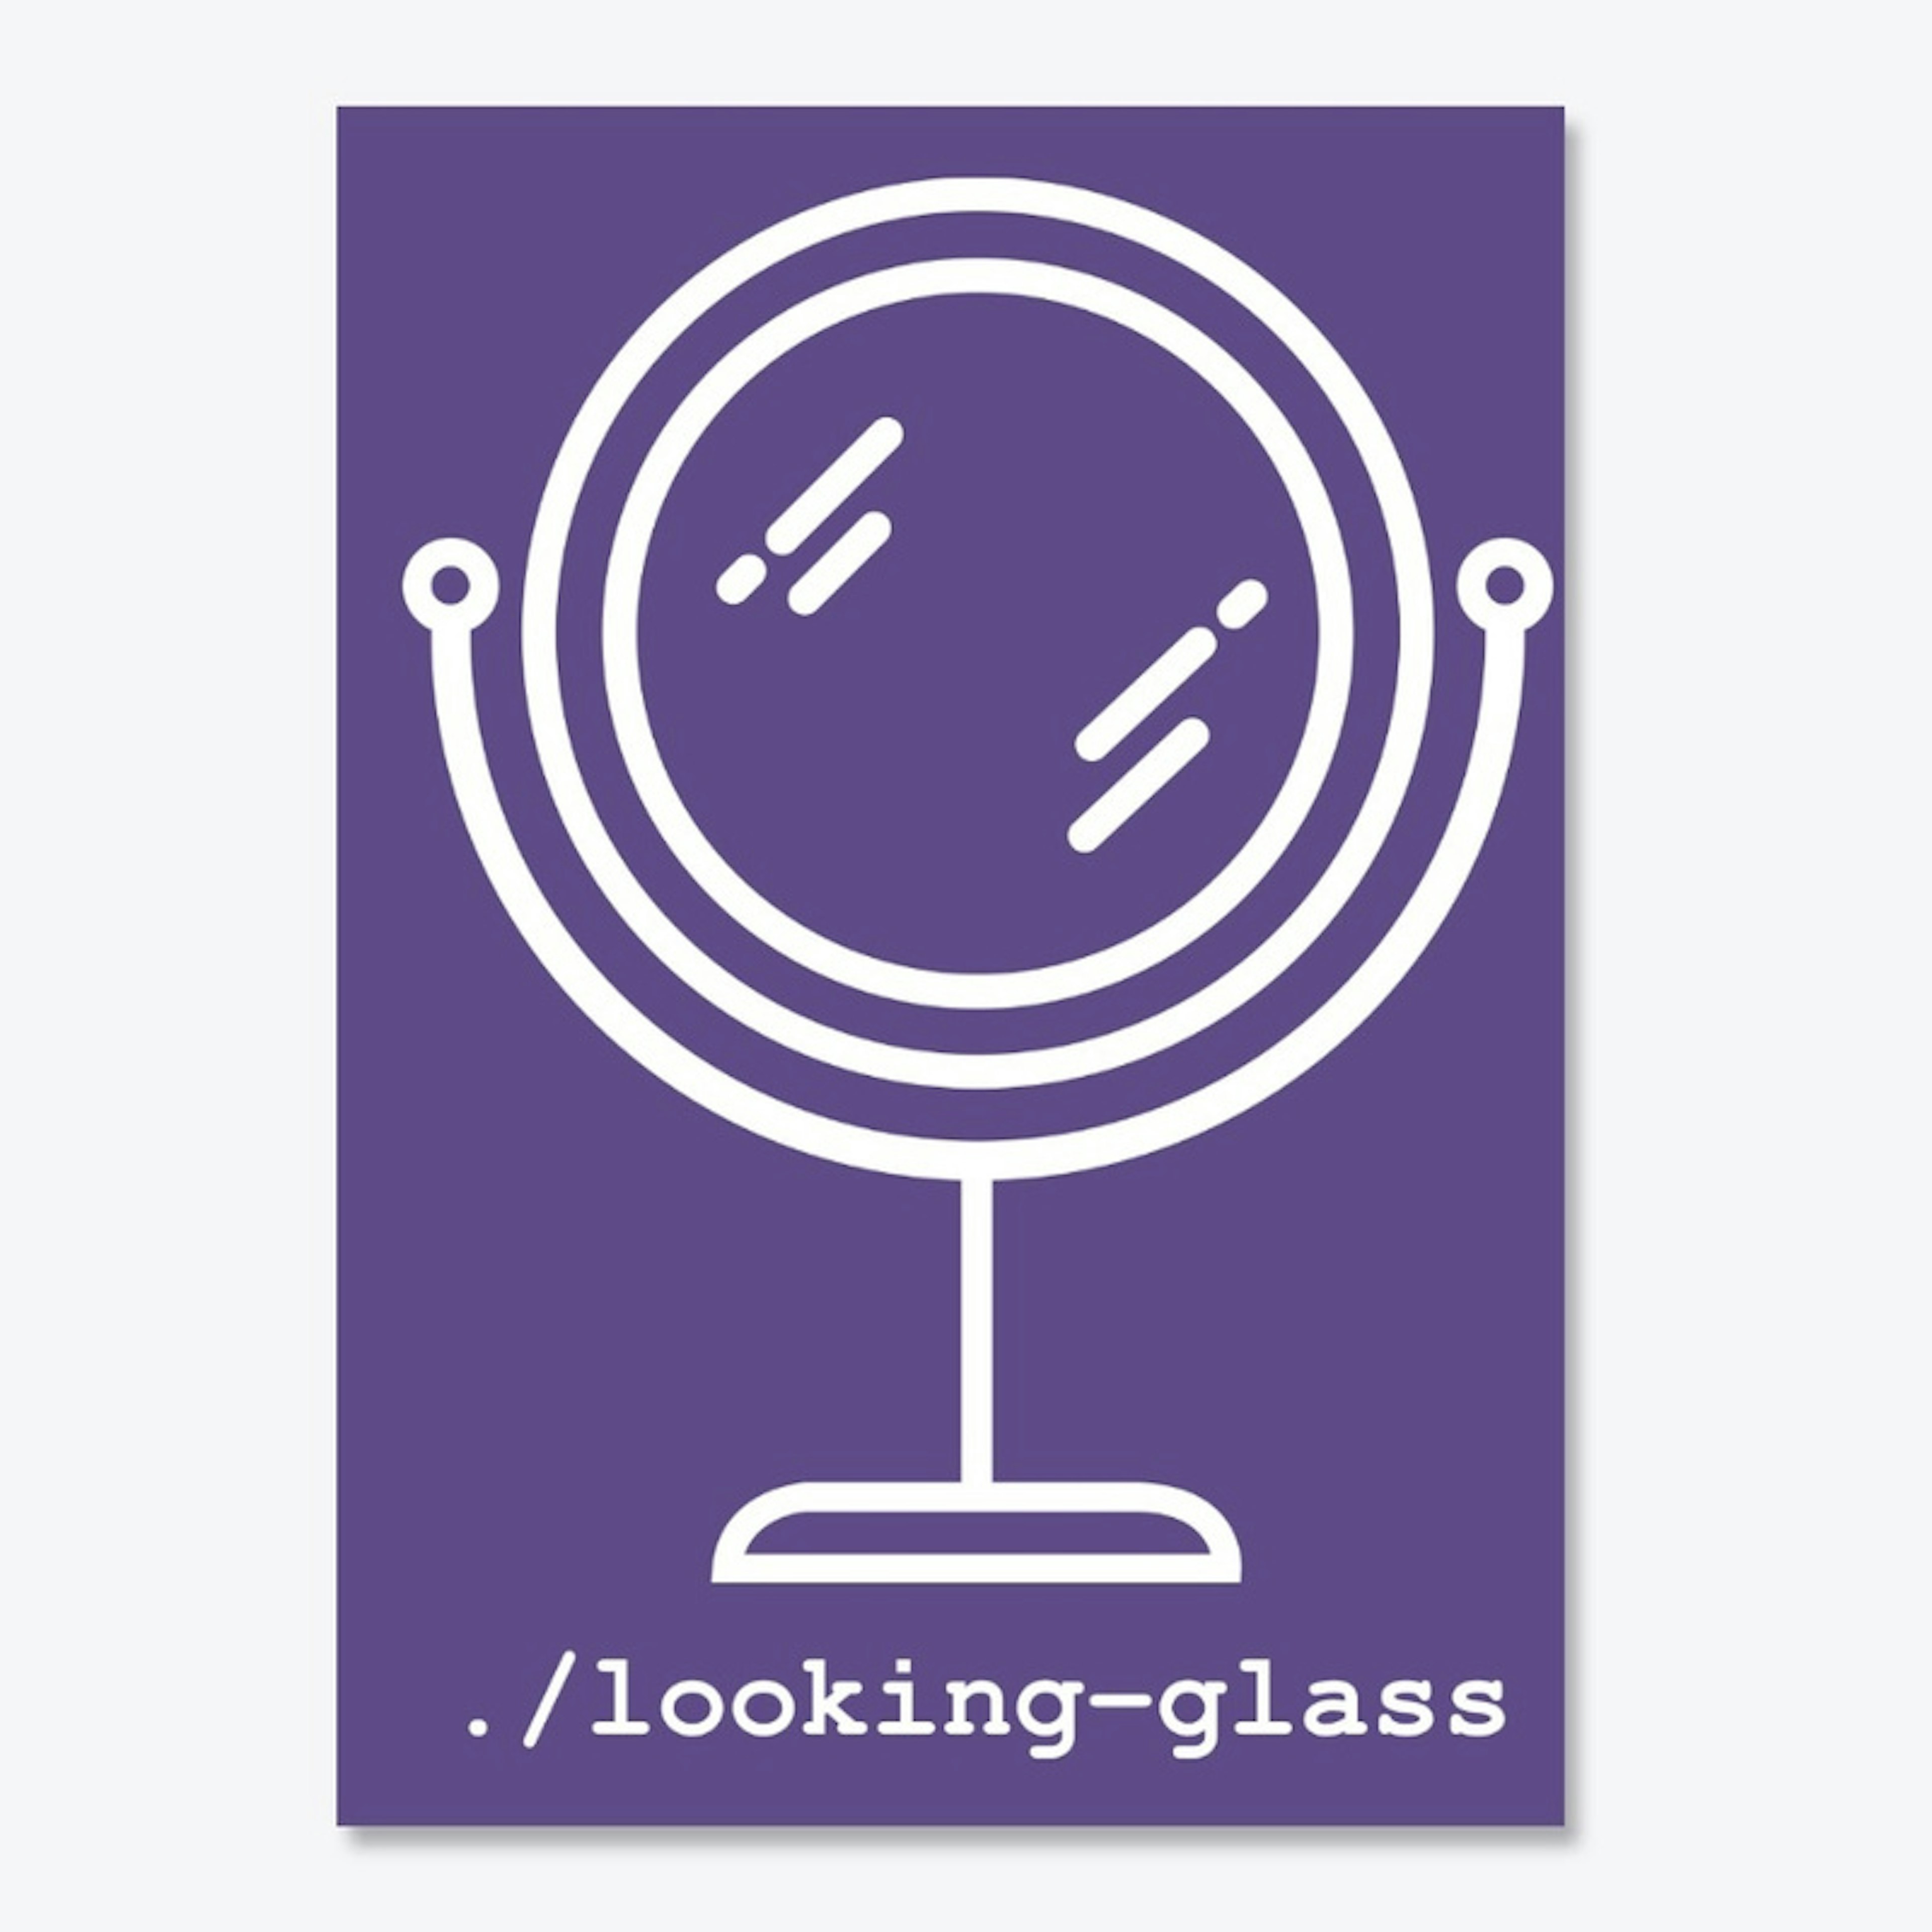 ./looking-glass